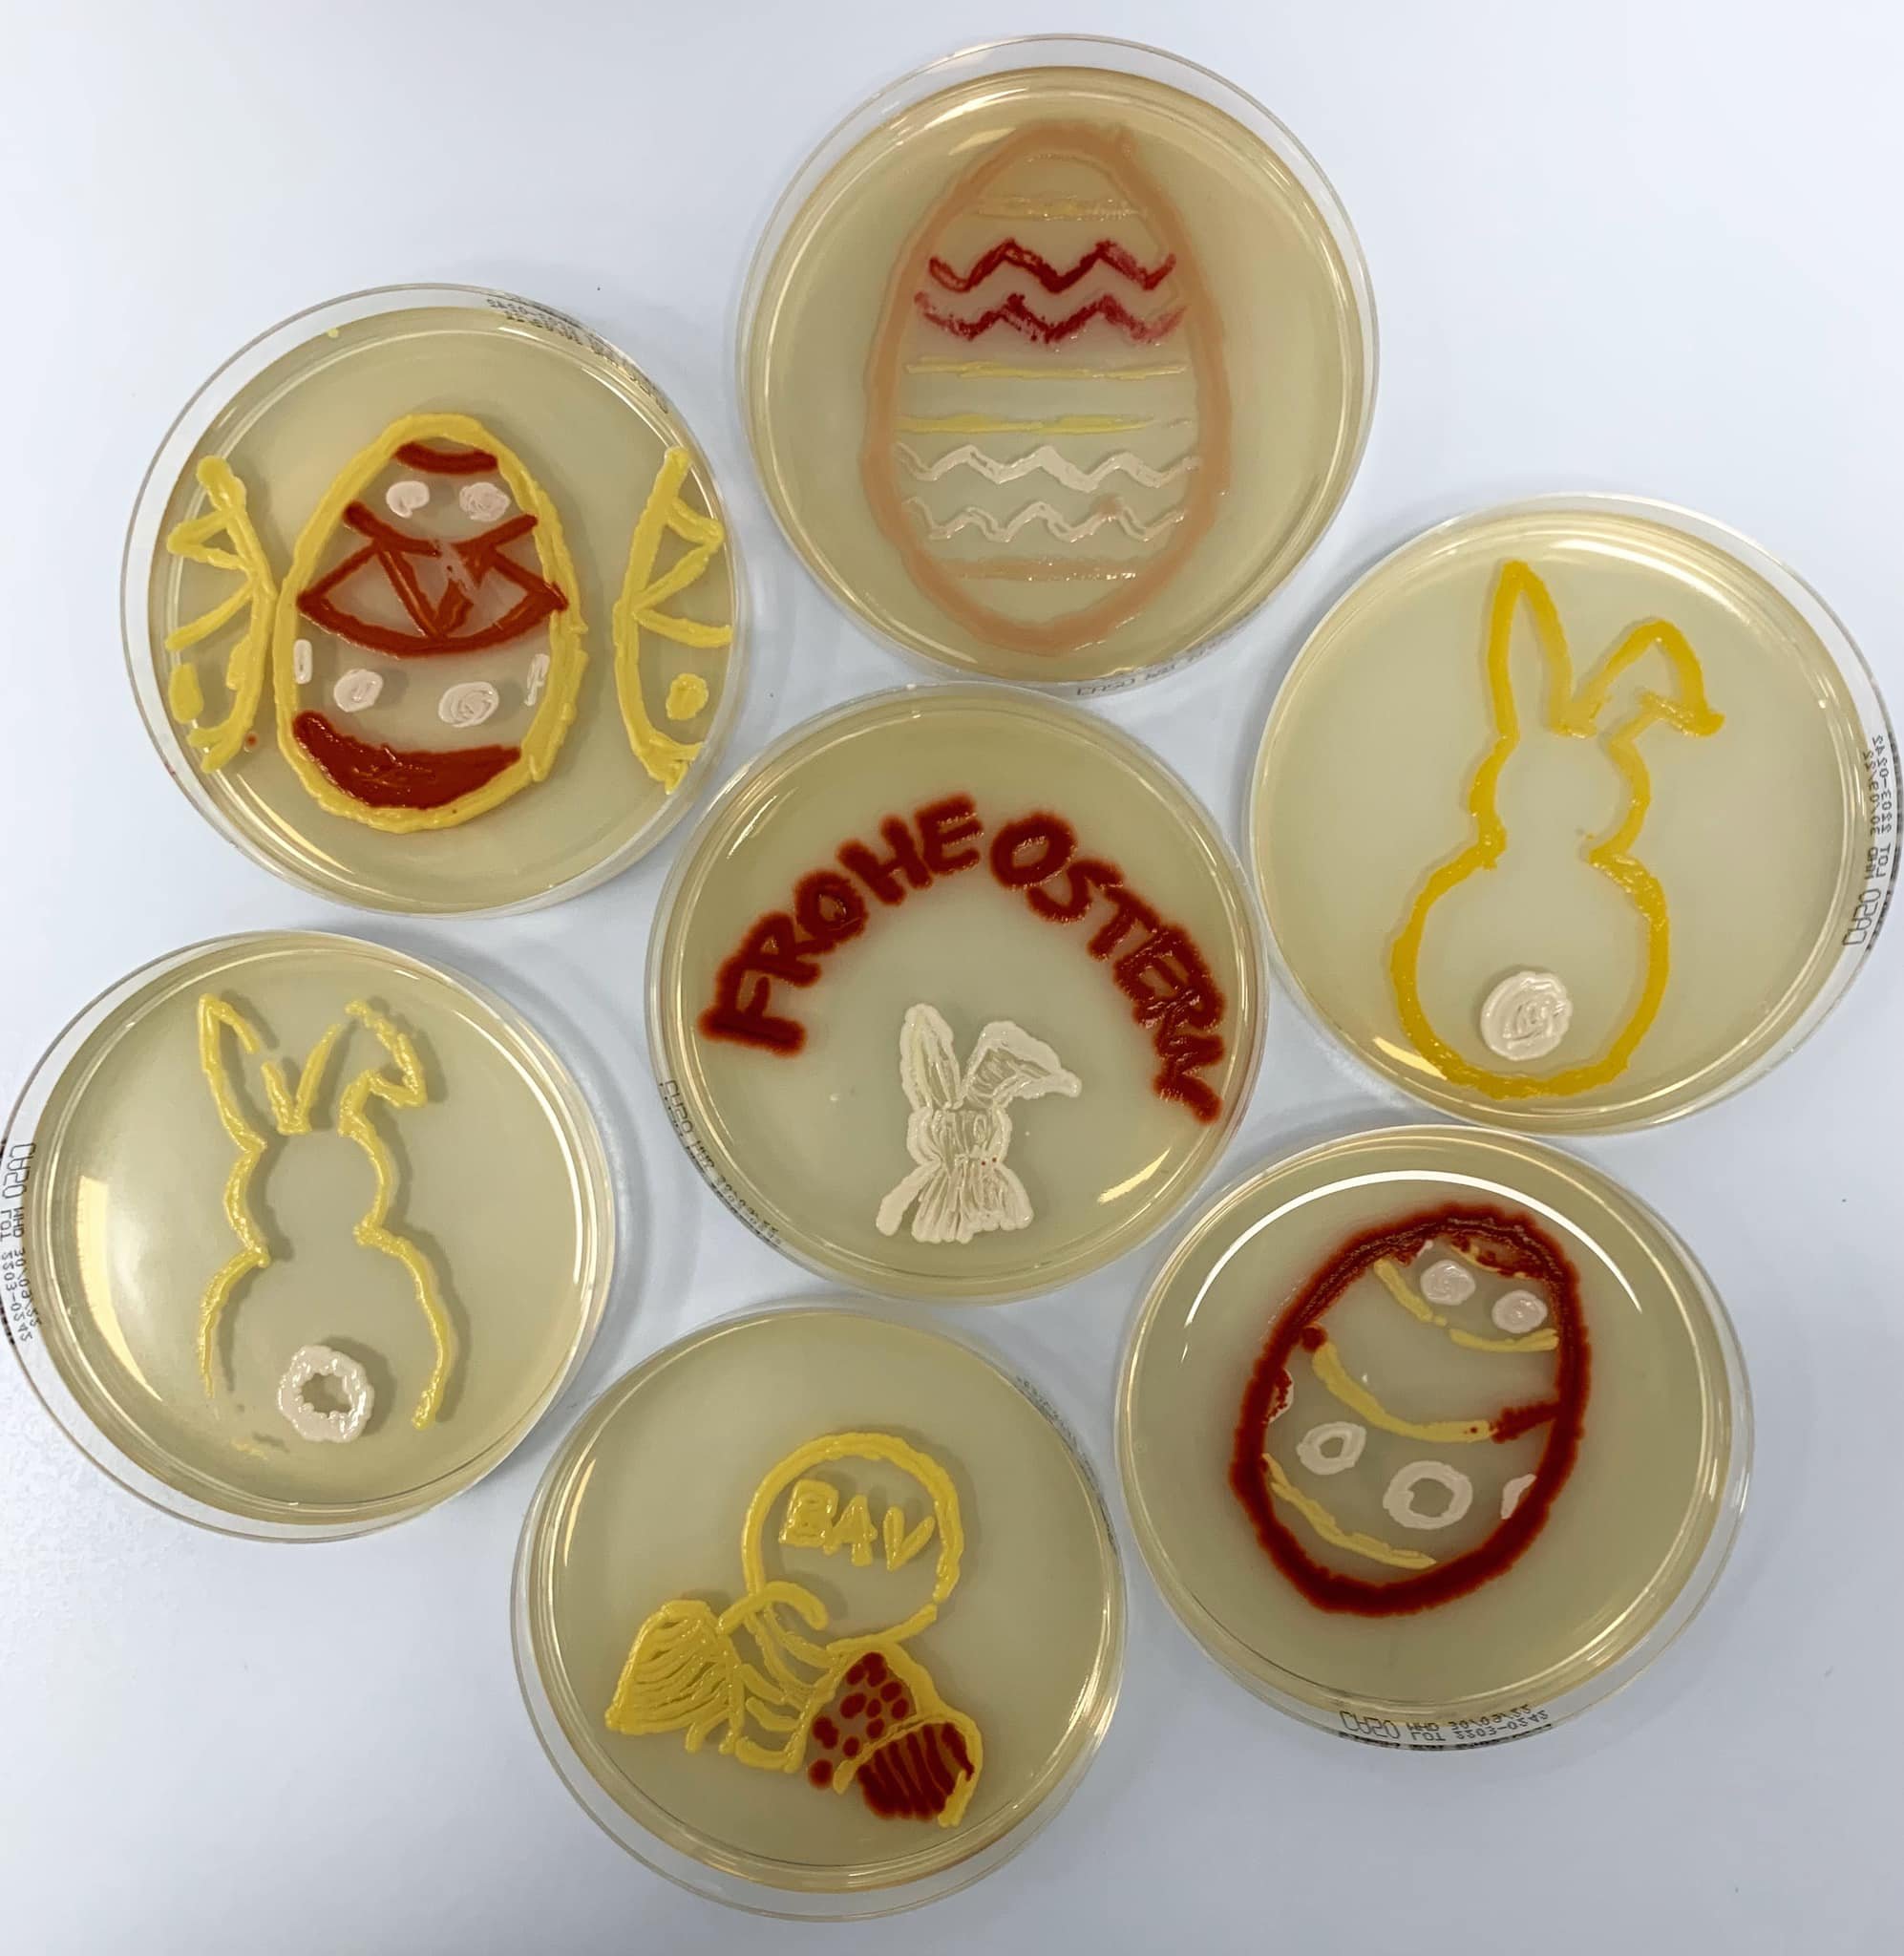  - Serratia marcescens - Staphylococcus sp. - Micrococcus luteus  Credit: BAV Institute for Hygiene and Quality Assurance, Germany 